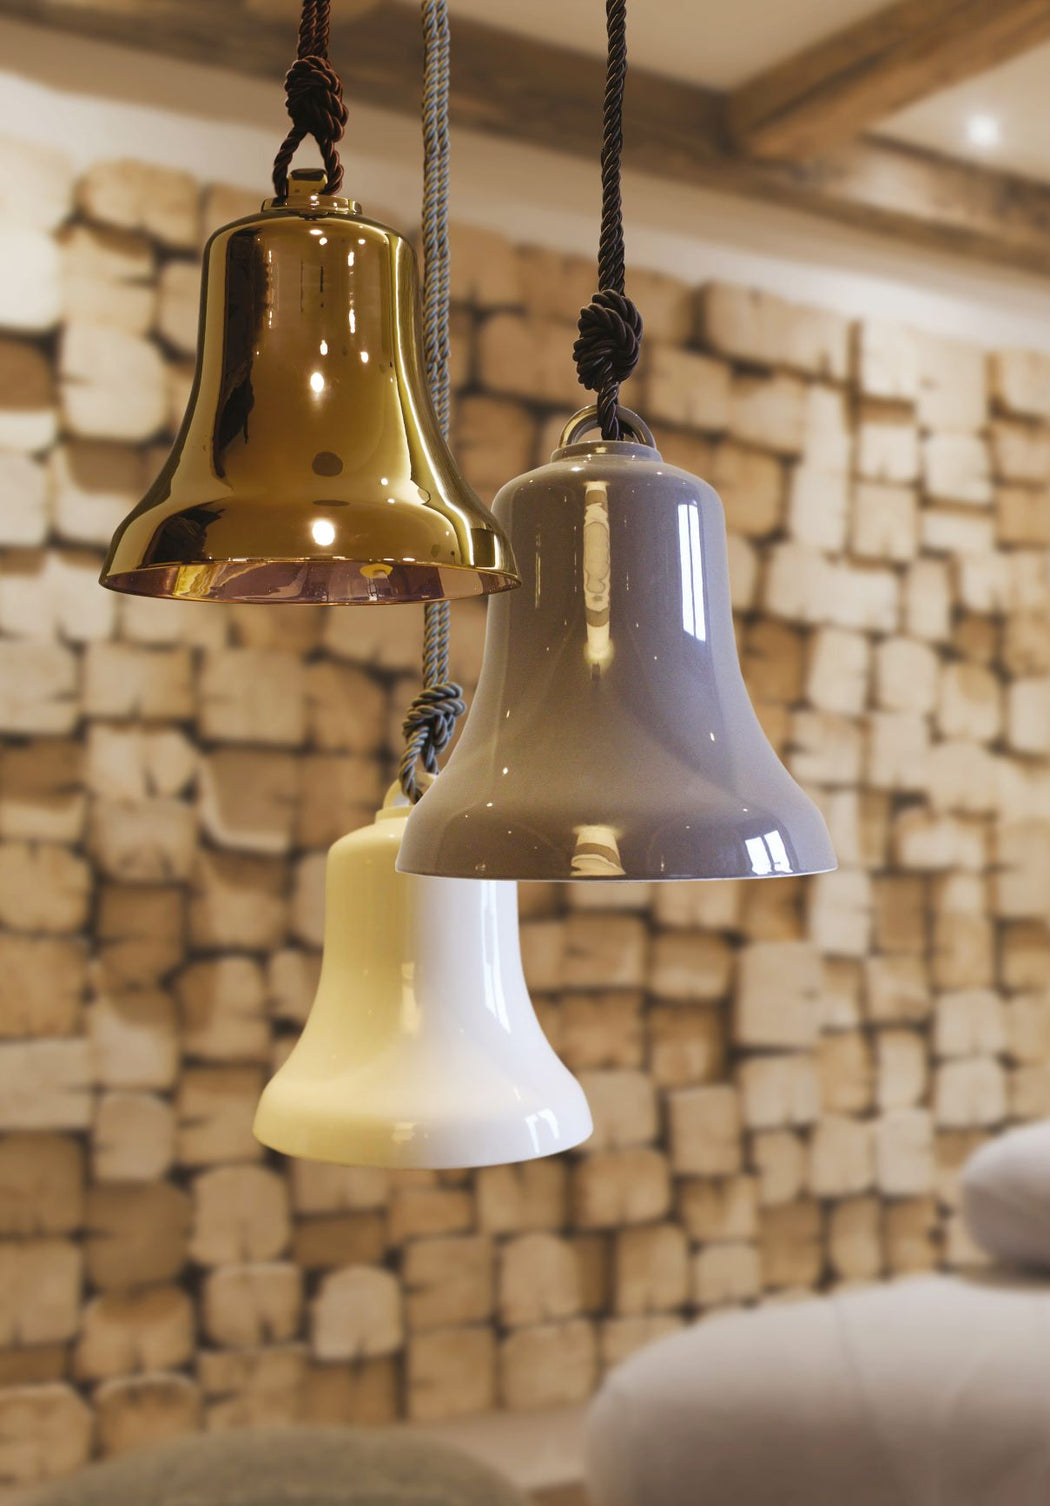 High-end glossy  ceramic bell-shaped ceiling pendant with warm bronze finish